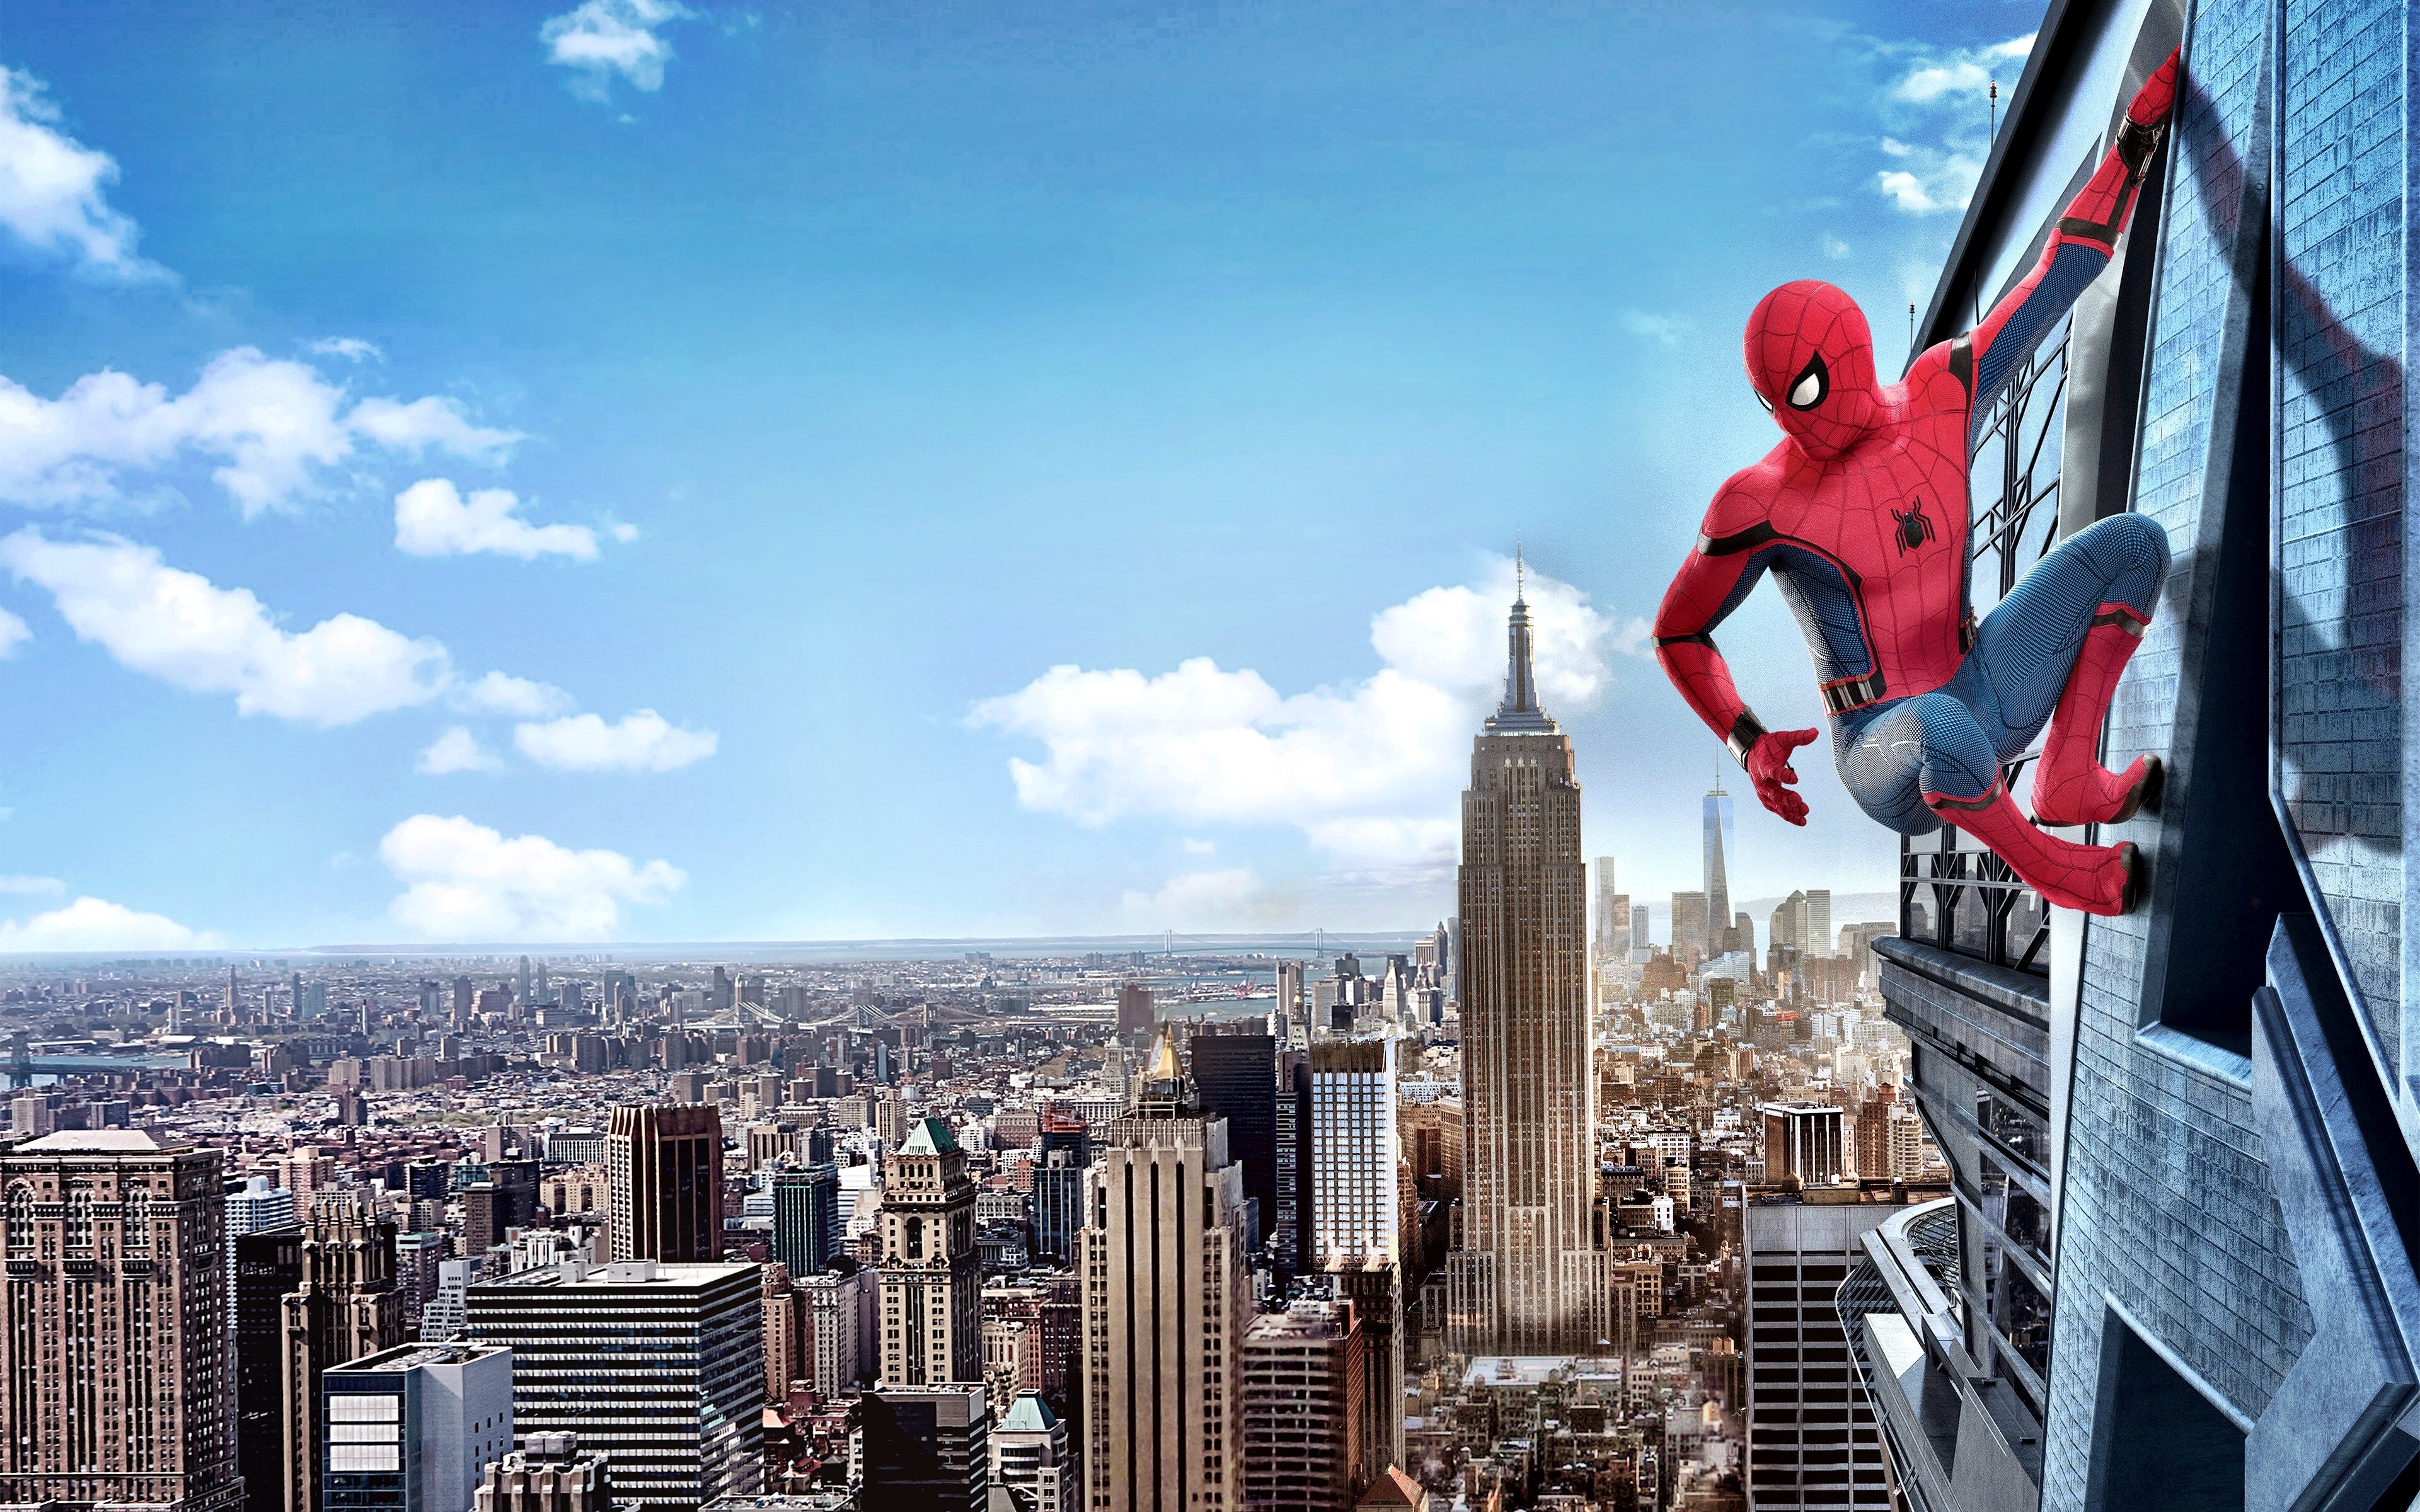 Cool Backgrounds empire state building, building, new york, movie Spider Man